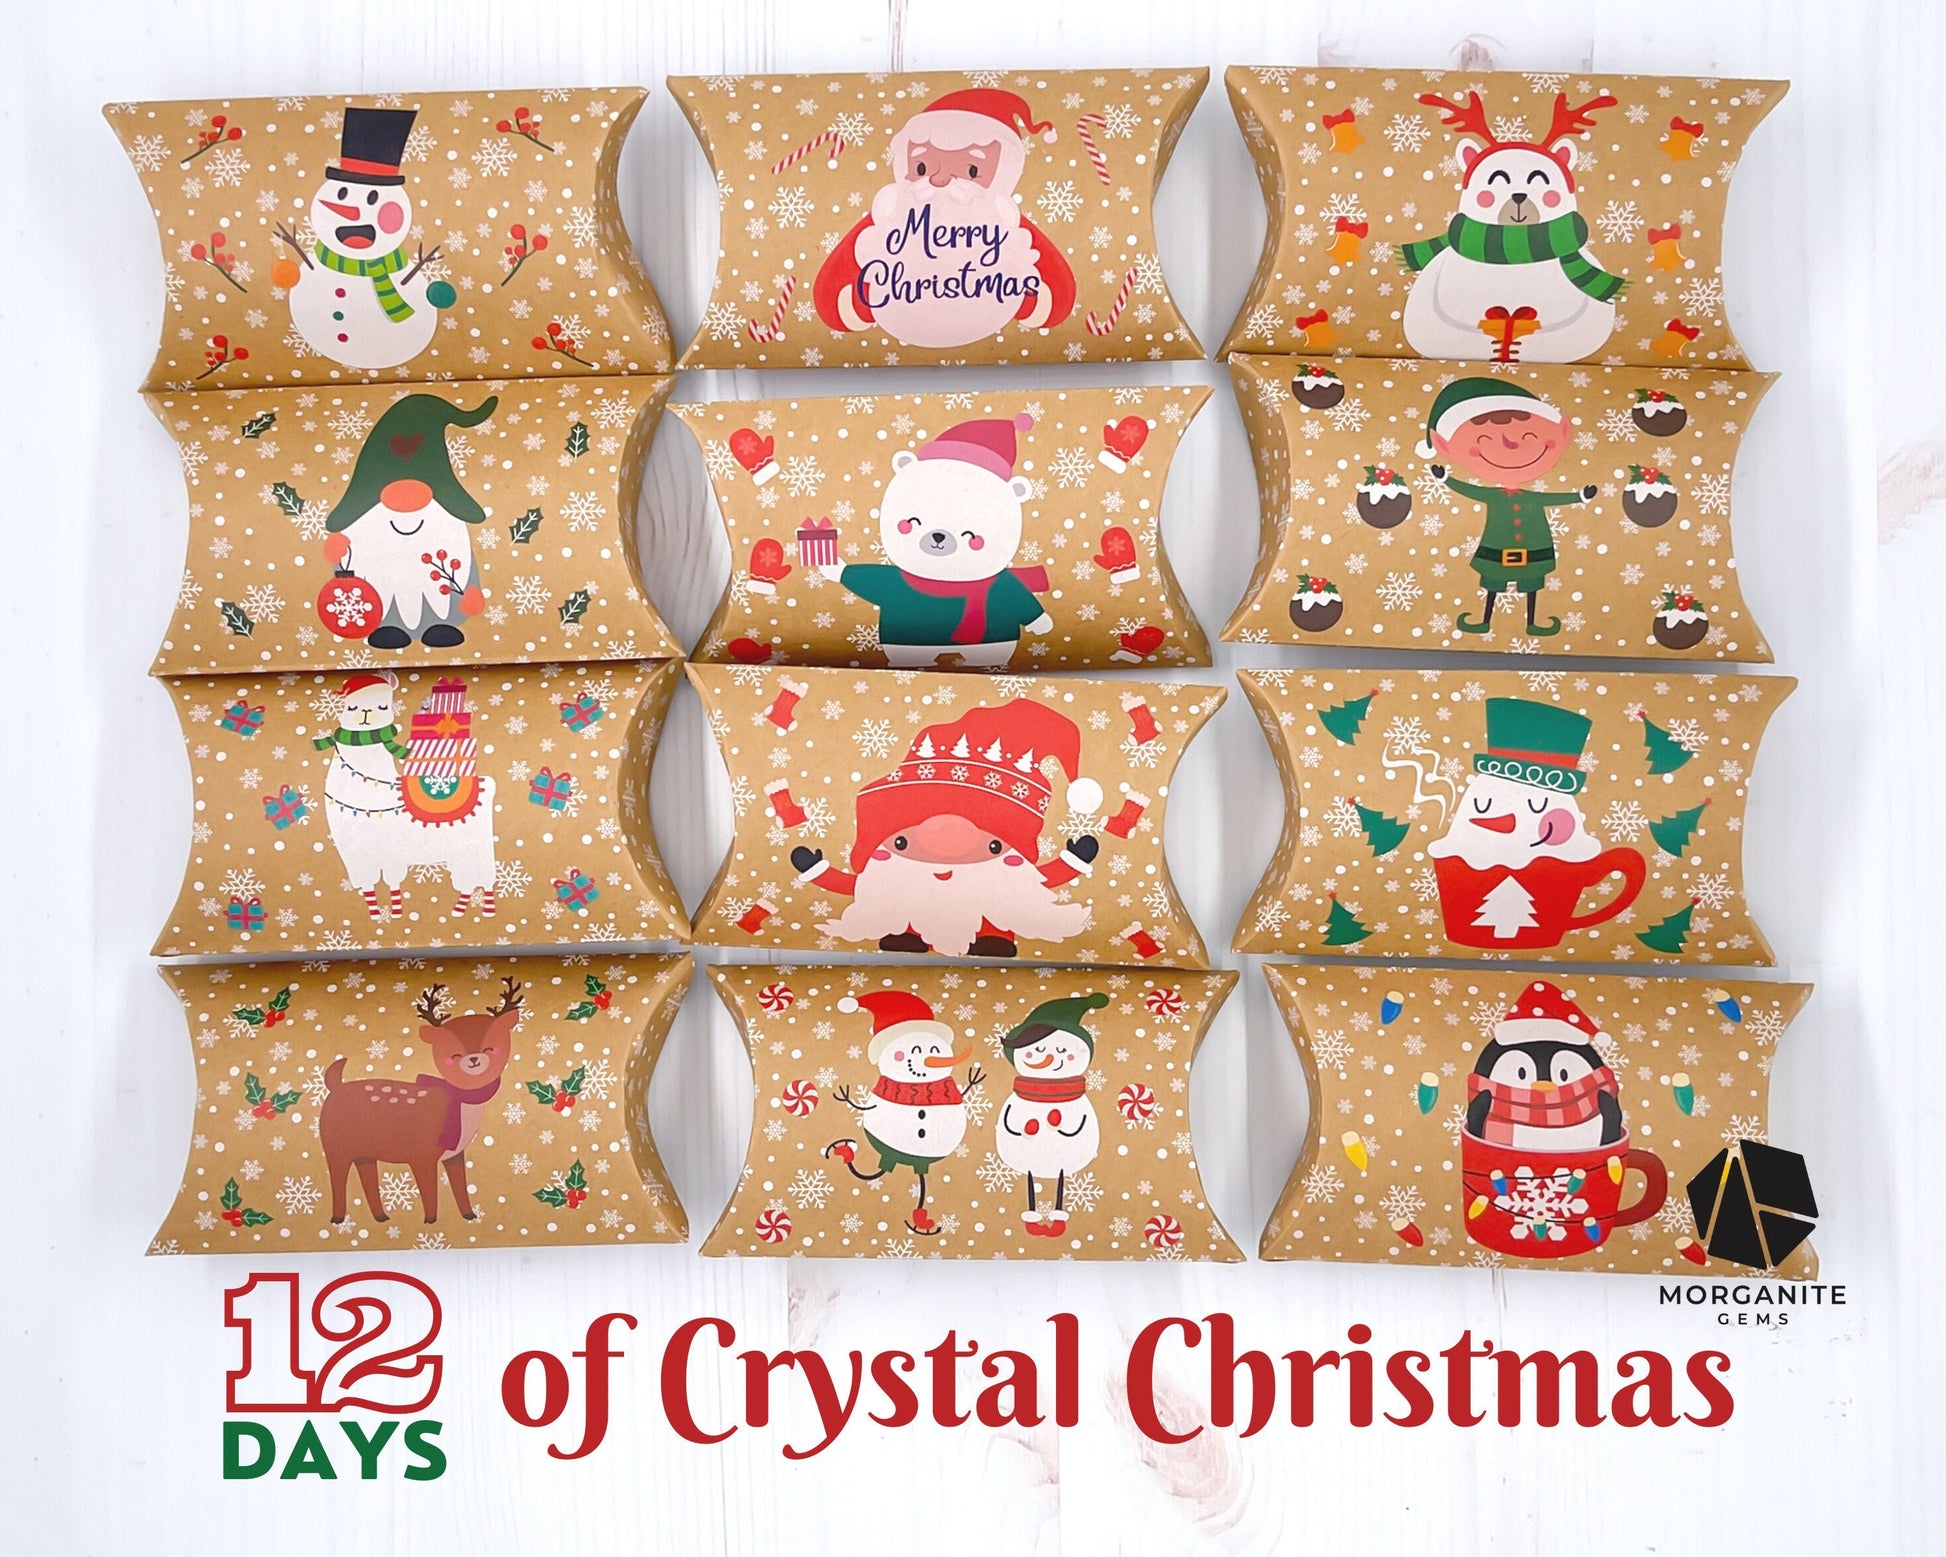 12 Days of Christmas Crystals Gifts